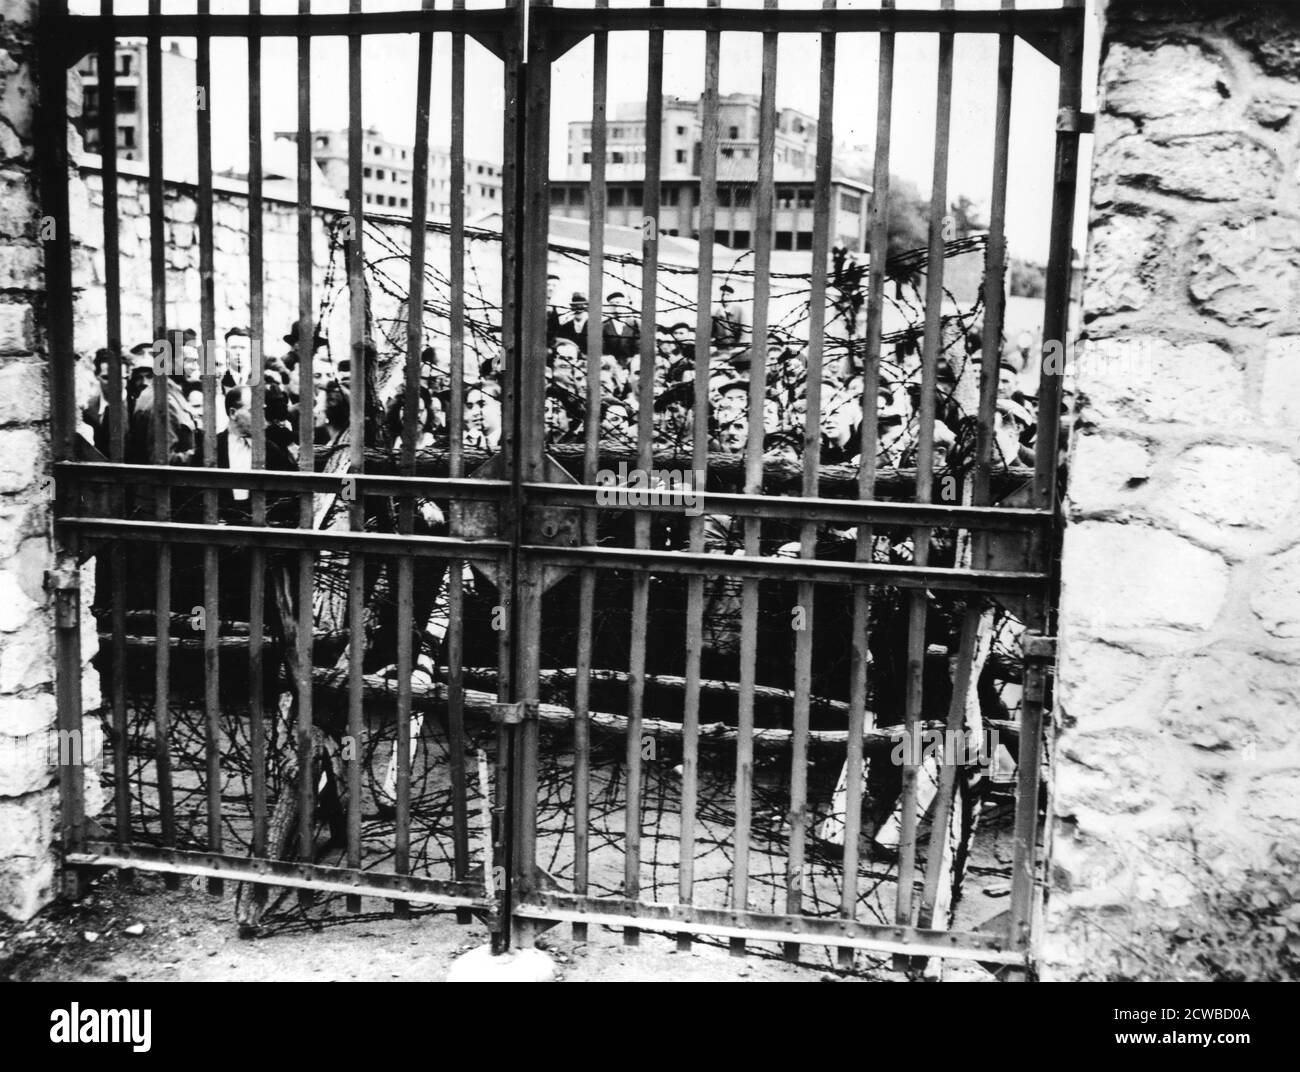 Families awaiting news of their loved ones, Air Ministry, Paris 1944. People wait behind locked gates for the results of tests to identify bodies found in the building's basement. The photographer is unknown. Stock Photo